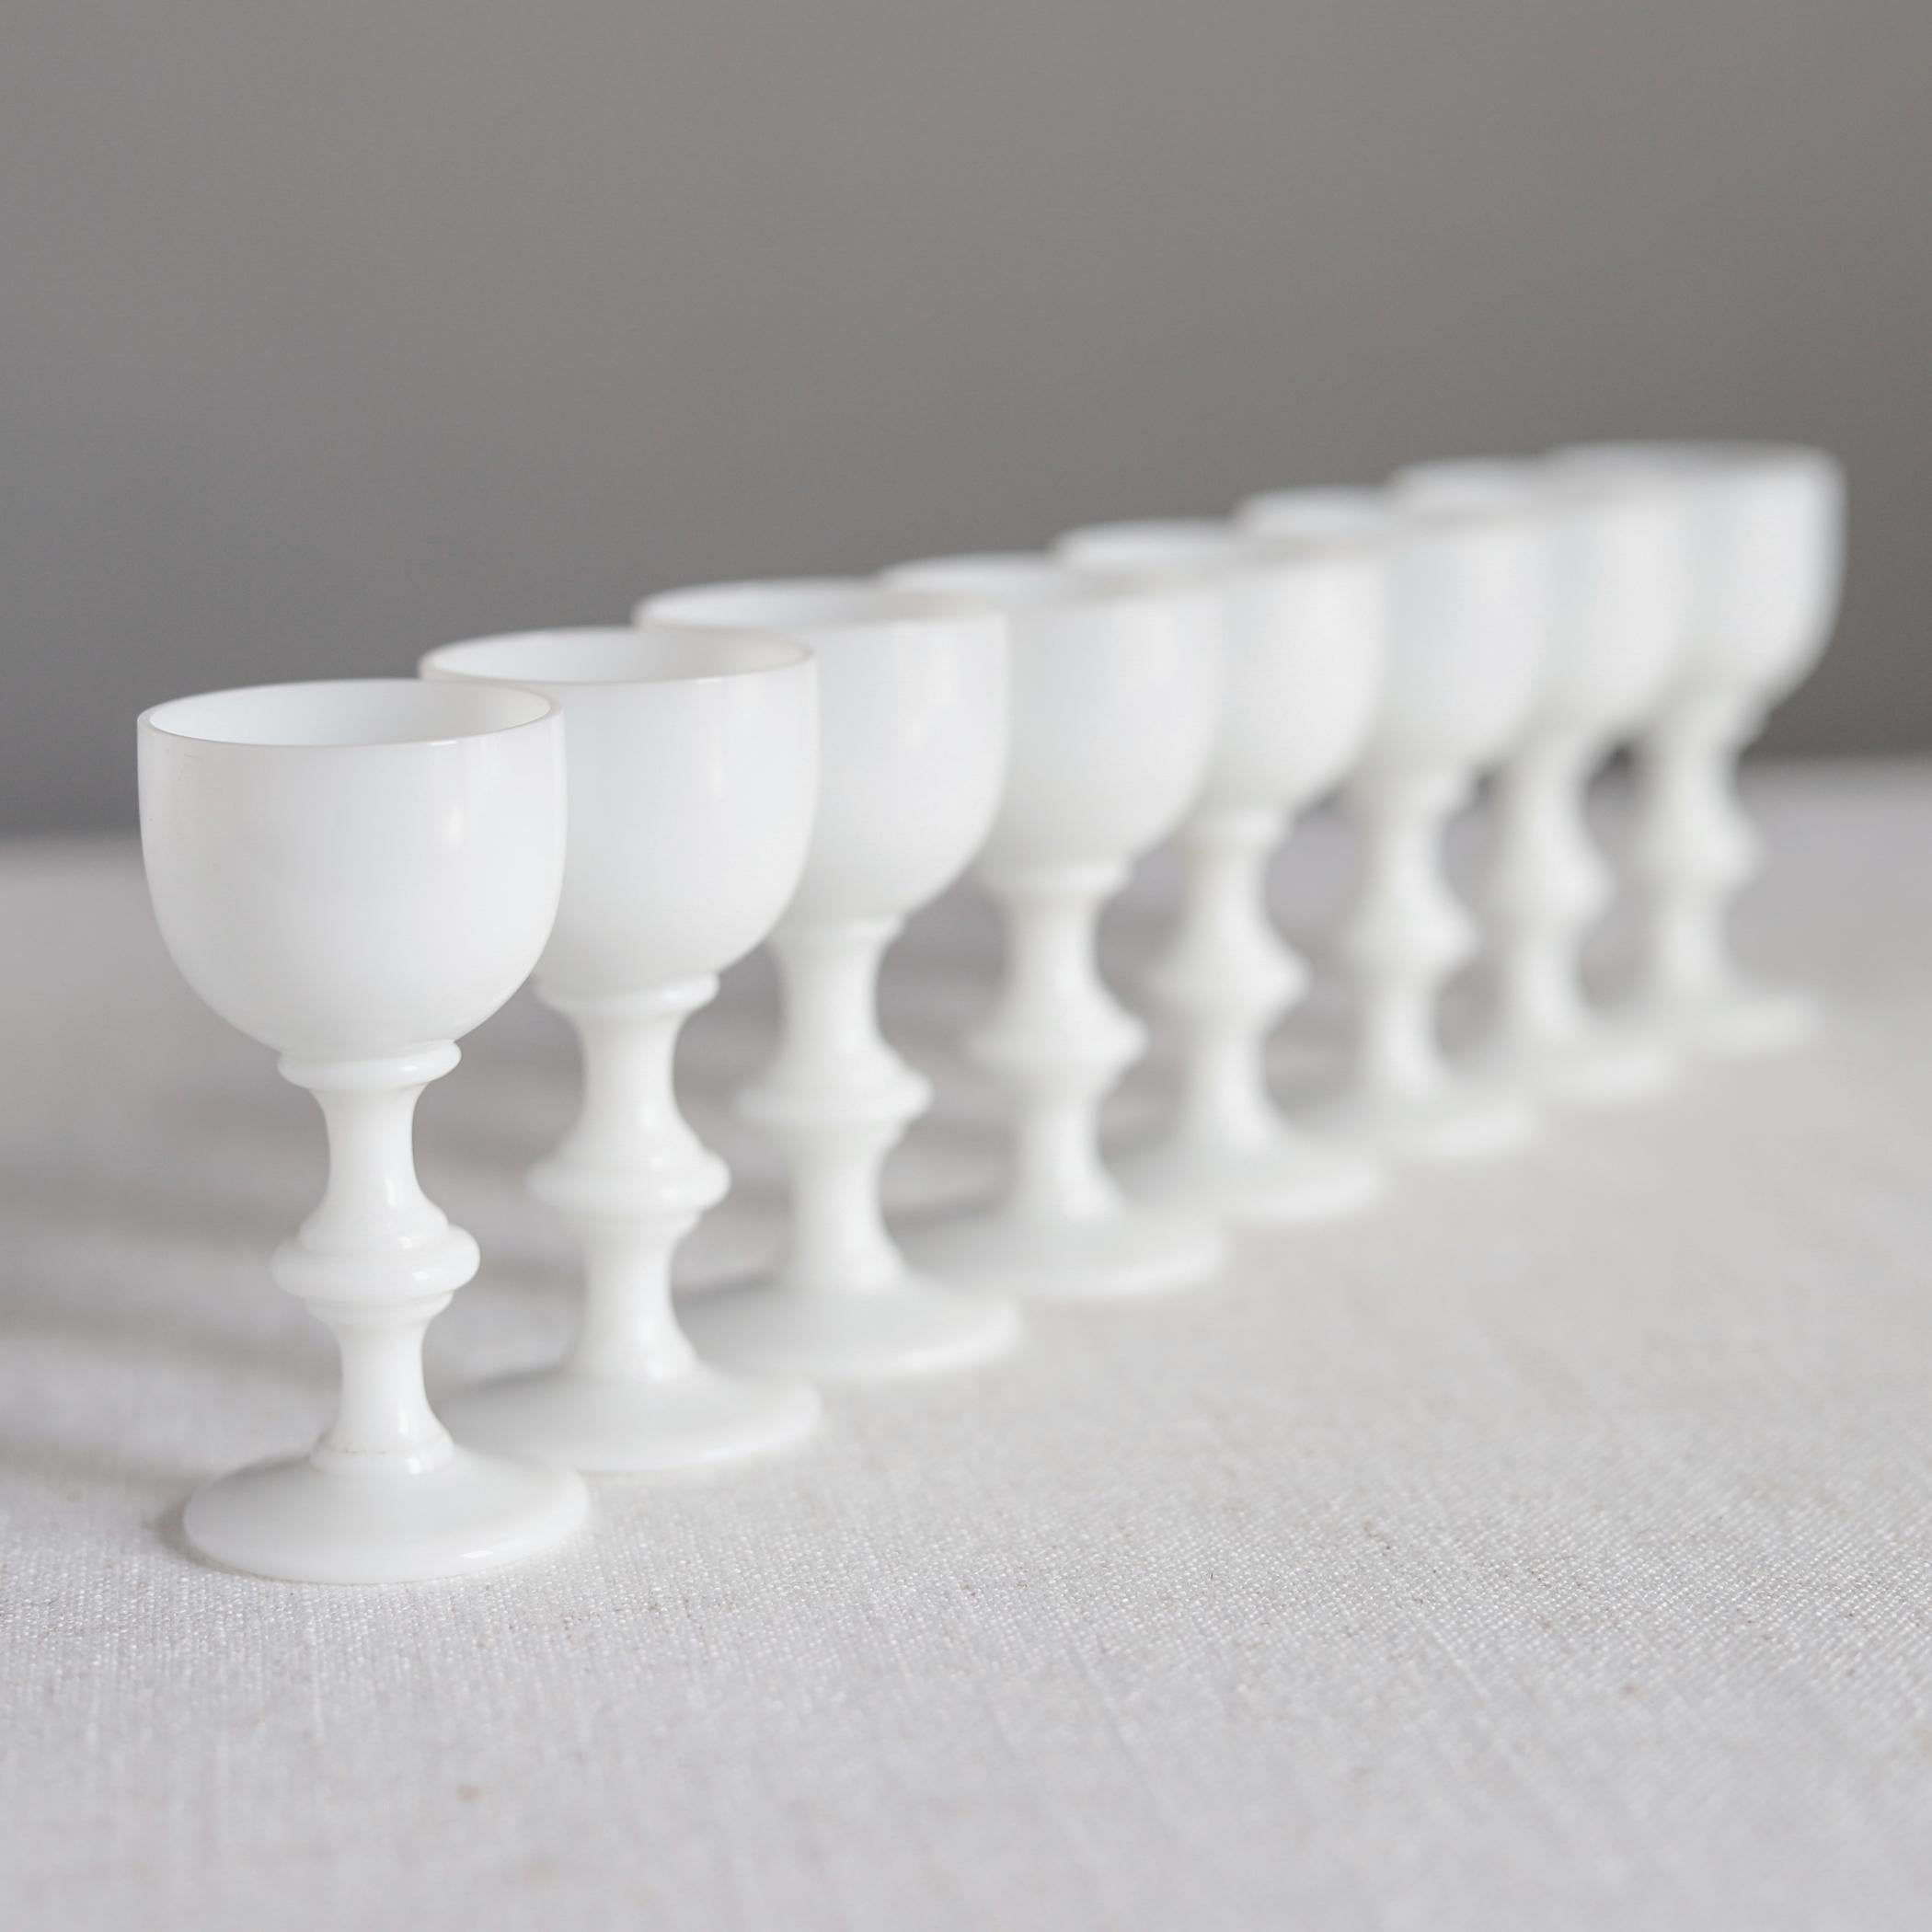 White glass decanter and eight cordial glasses by French manufacturer Portieux Vallerysthal. These glasses are very small, for just a small amount of after-dinner cordial. 

The decanter measures about 11 1/2 inches high, each cordial glass is 3 3/8